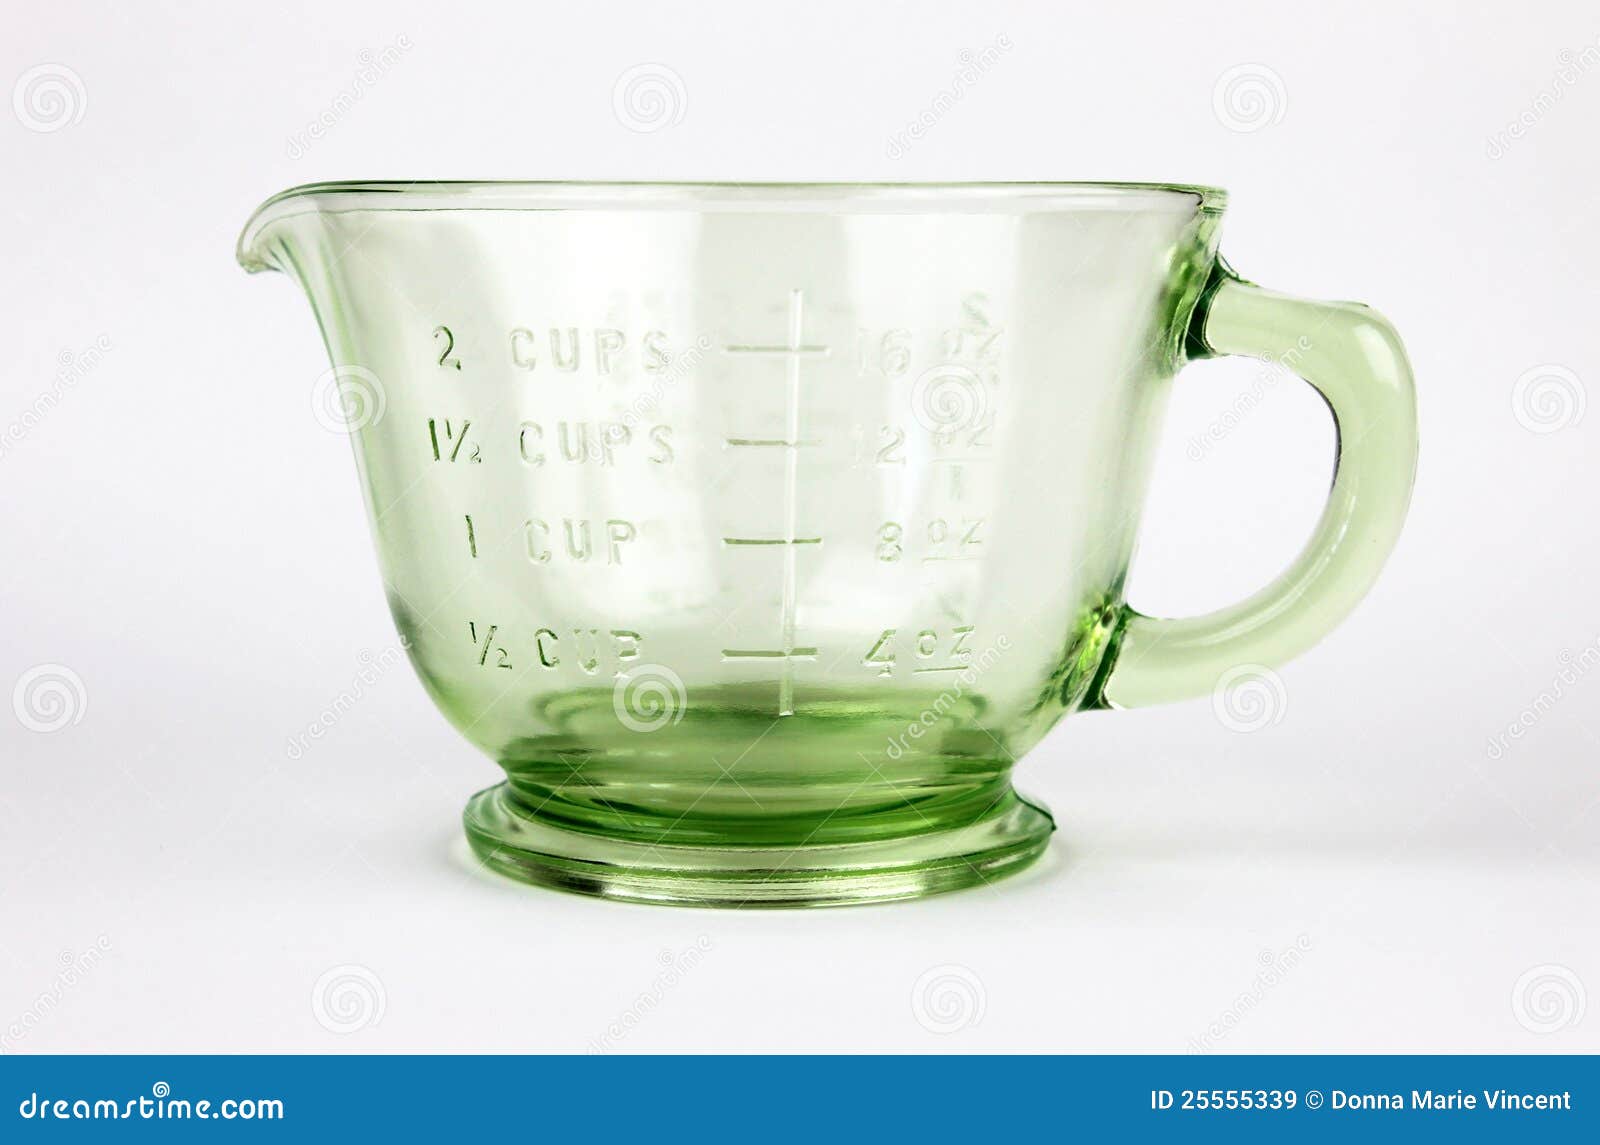 https://thumbs.dreamstime.com/z/green-depression-glass-measuring-cup-25555339.jpg